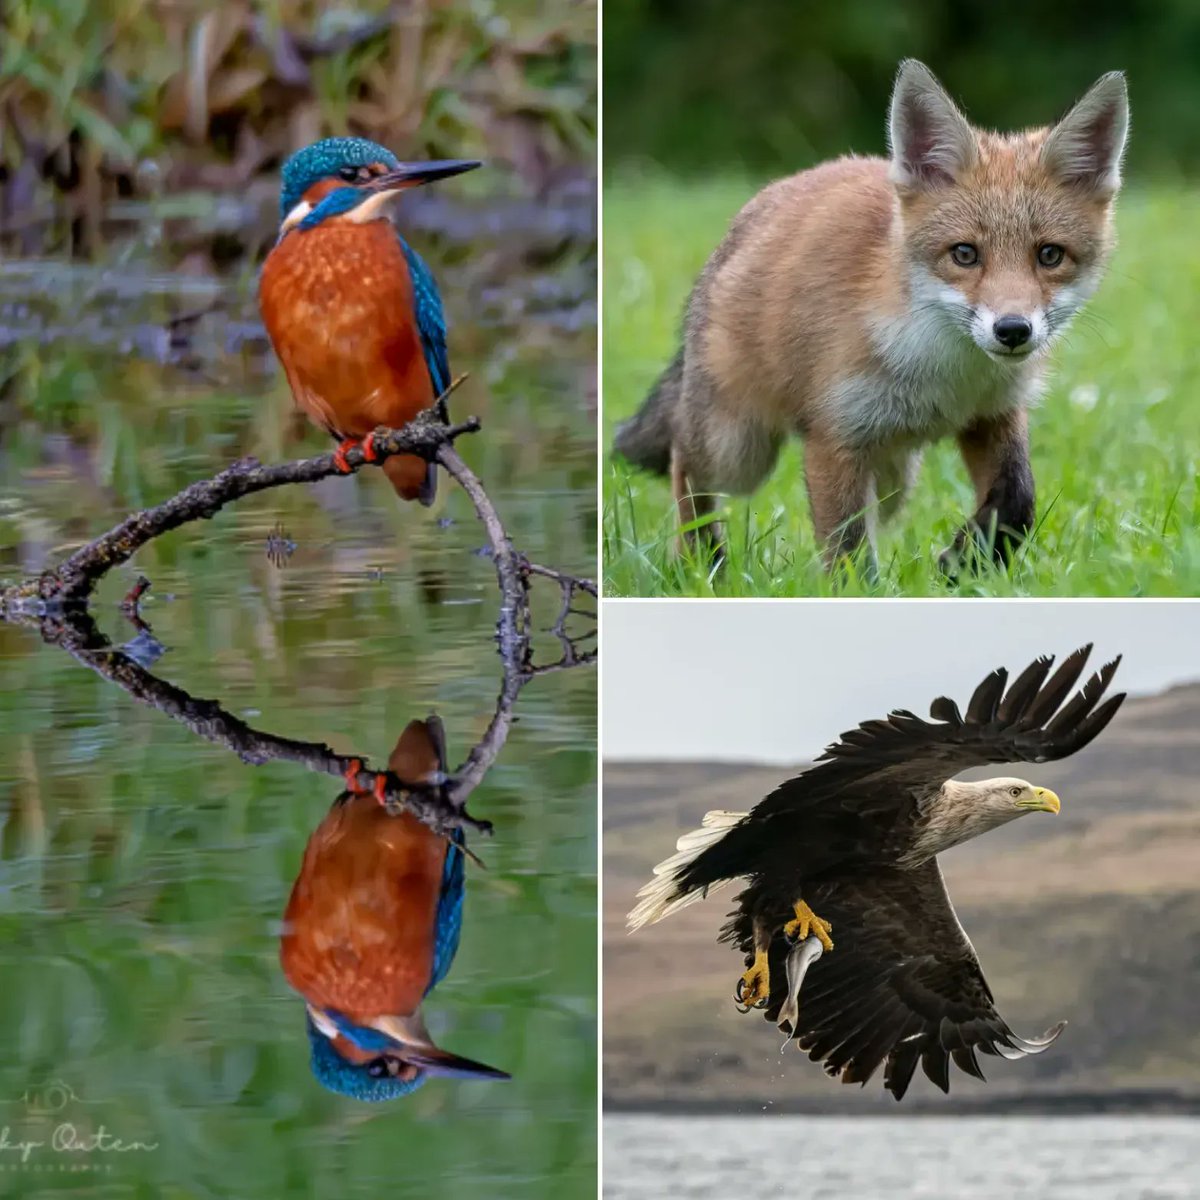 As it's my birthday today I thought I'd choose a few of my favourite shots which I've taken this year. Hope you like then.  

vickyoutenphotography.com 

#birthday #ayearolder #wildlifephotography #redfoxcub #fox #cub #kingfisher #seaeagle #whitetailedseaeagle #eagle